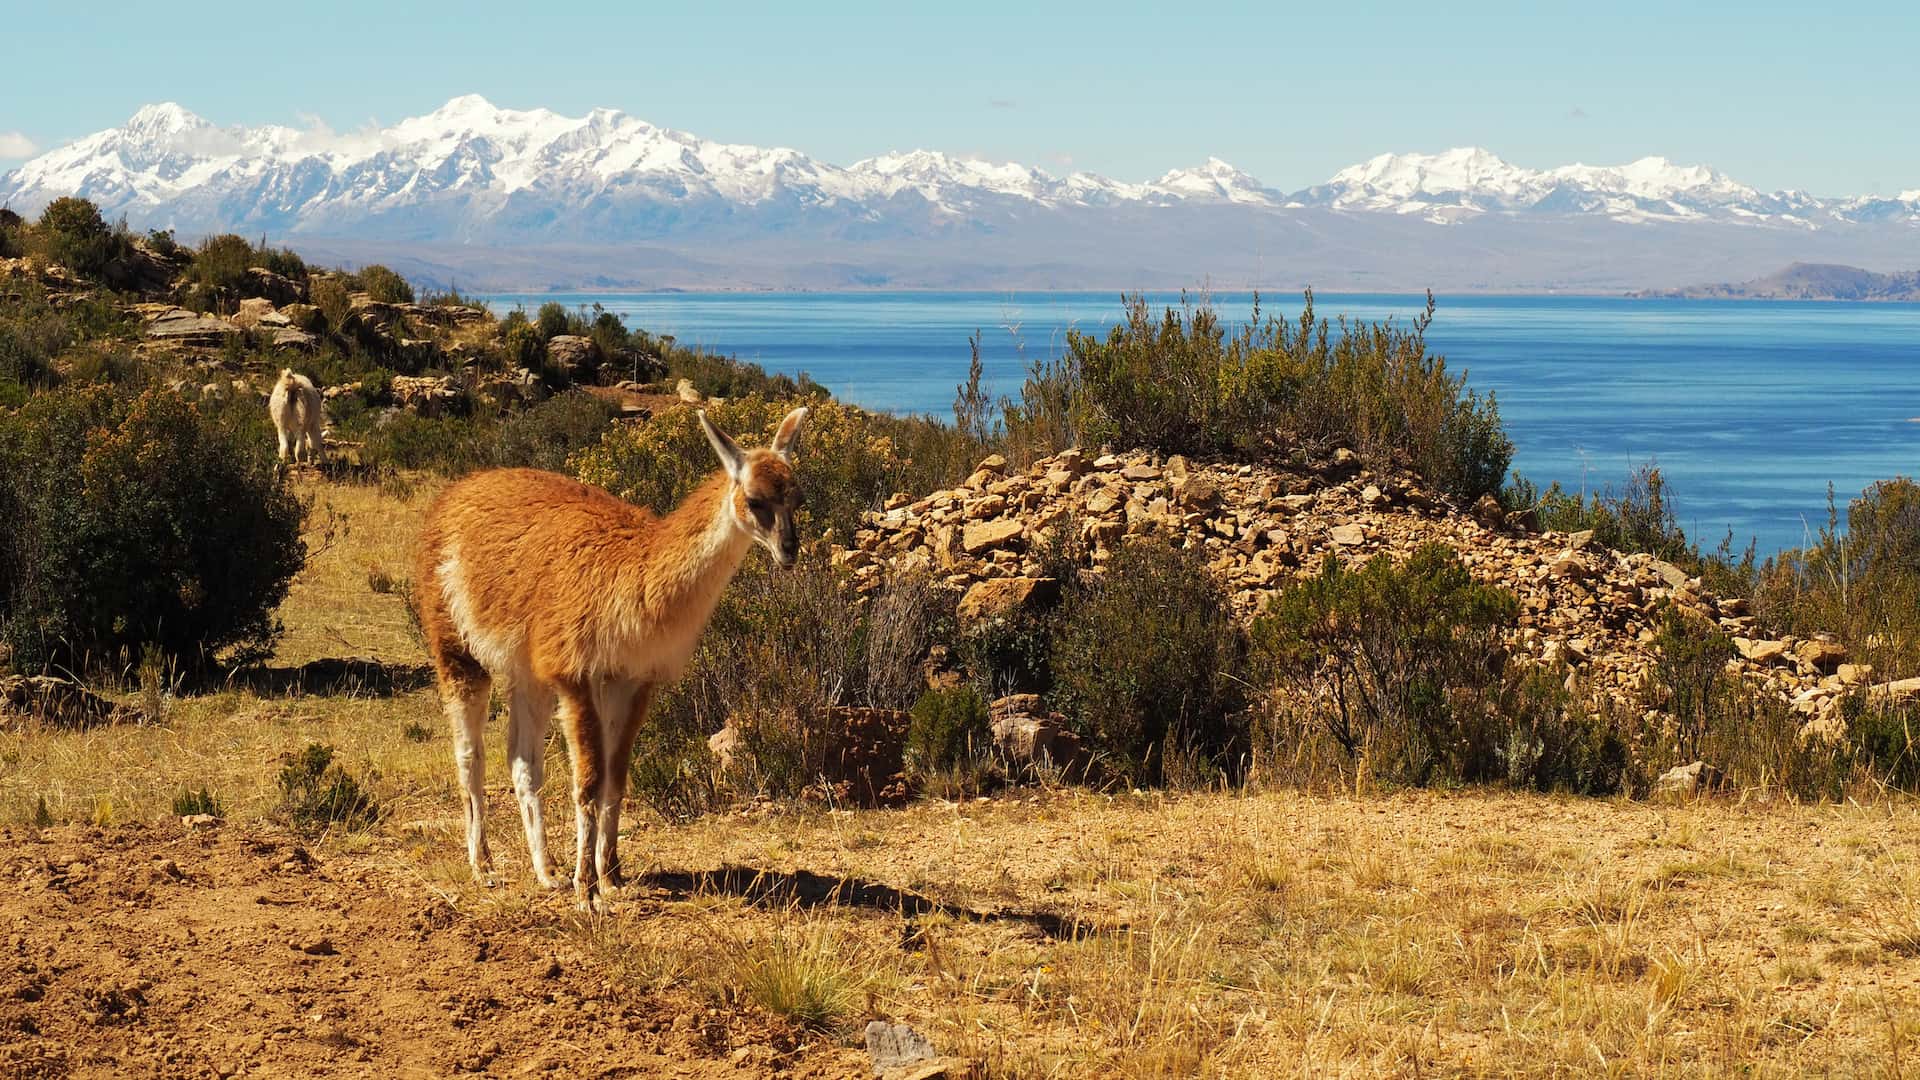 A deer-like animal (vicuña) stands on farmland with a lake behind and snow-capped mountains in the background